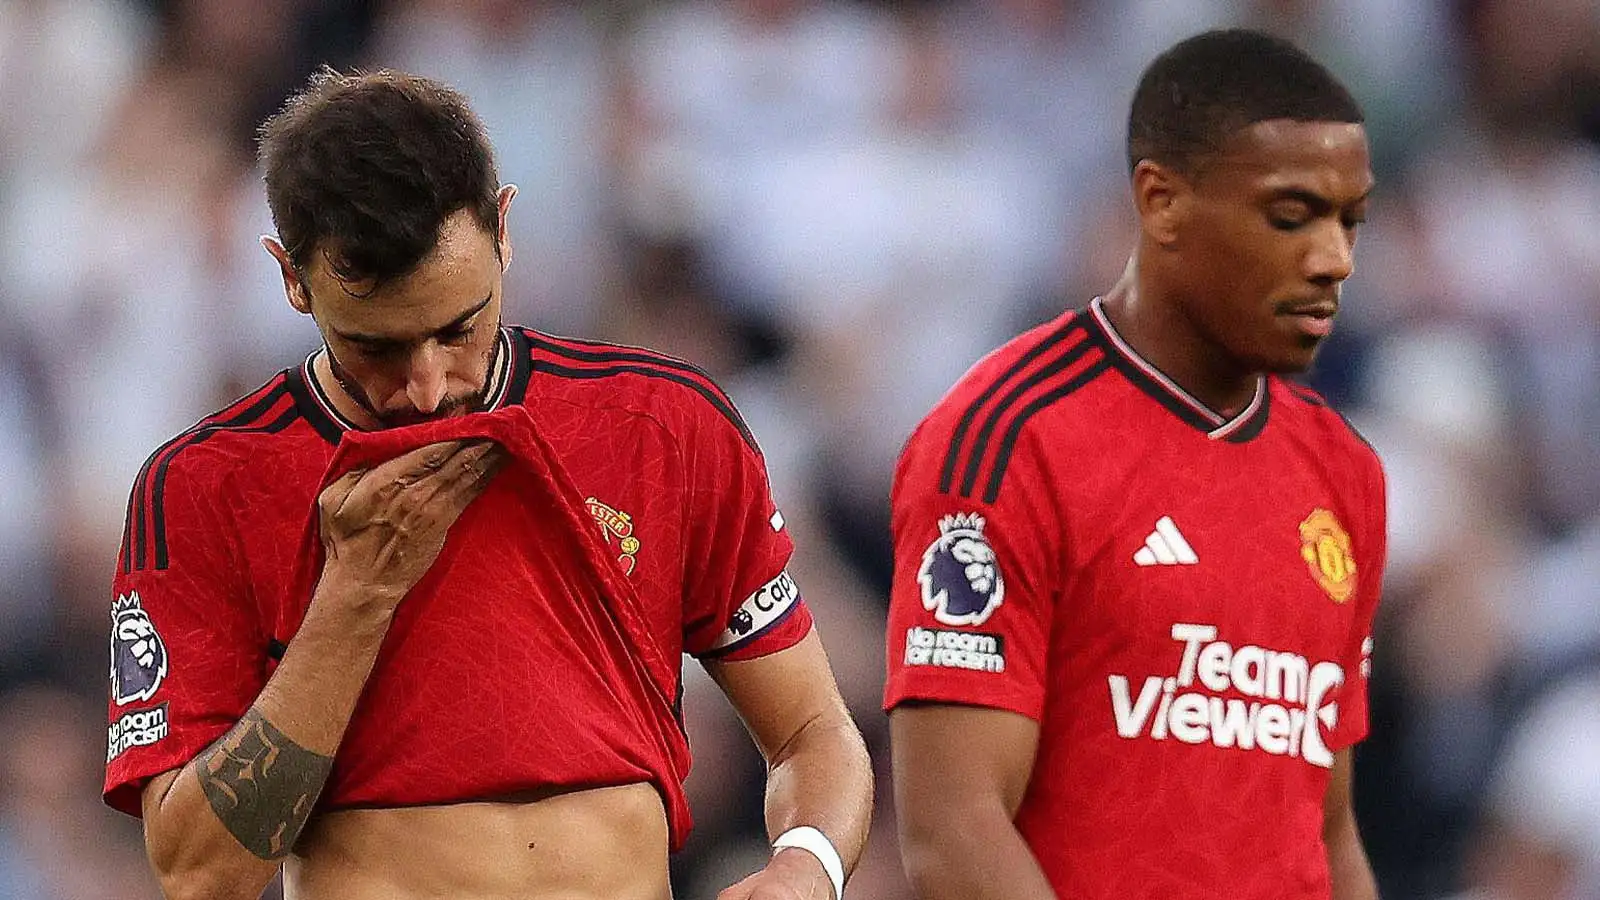 Bruno Fernandes of Manchester United and Anthony Martial